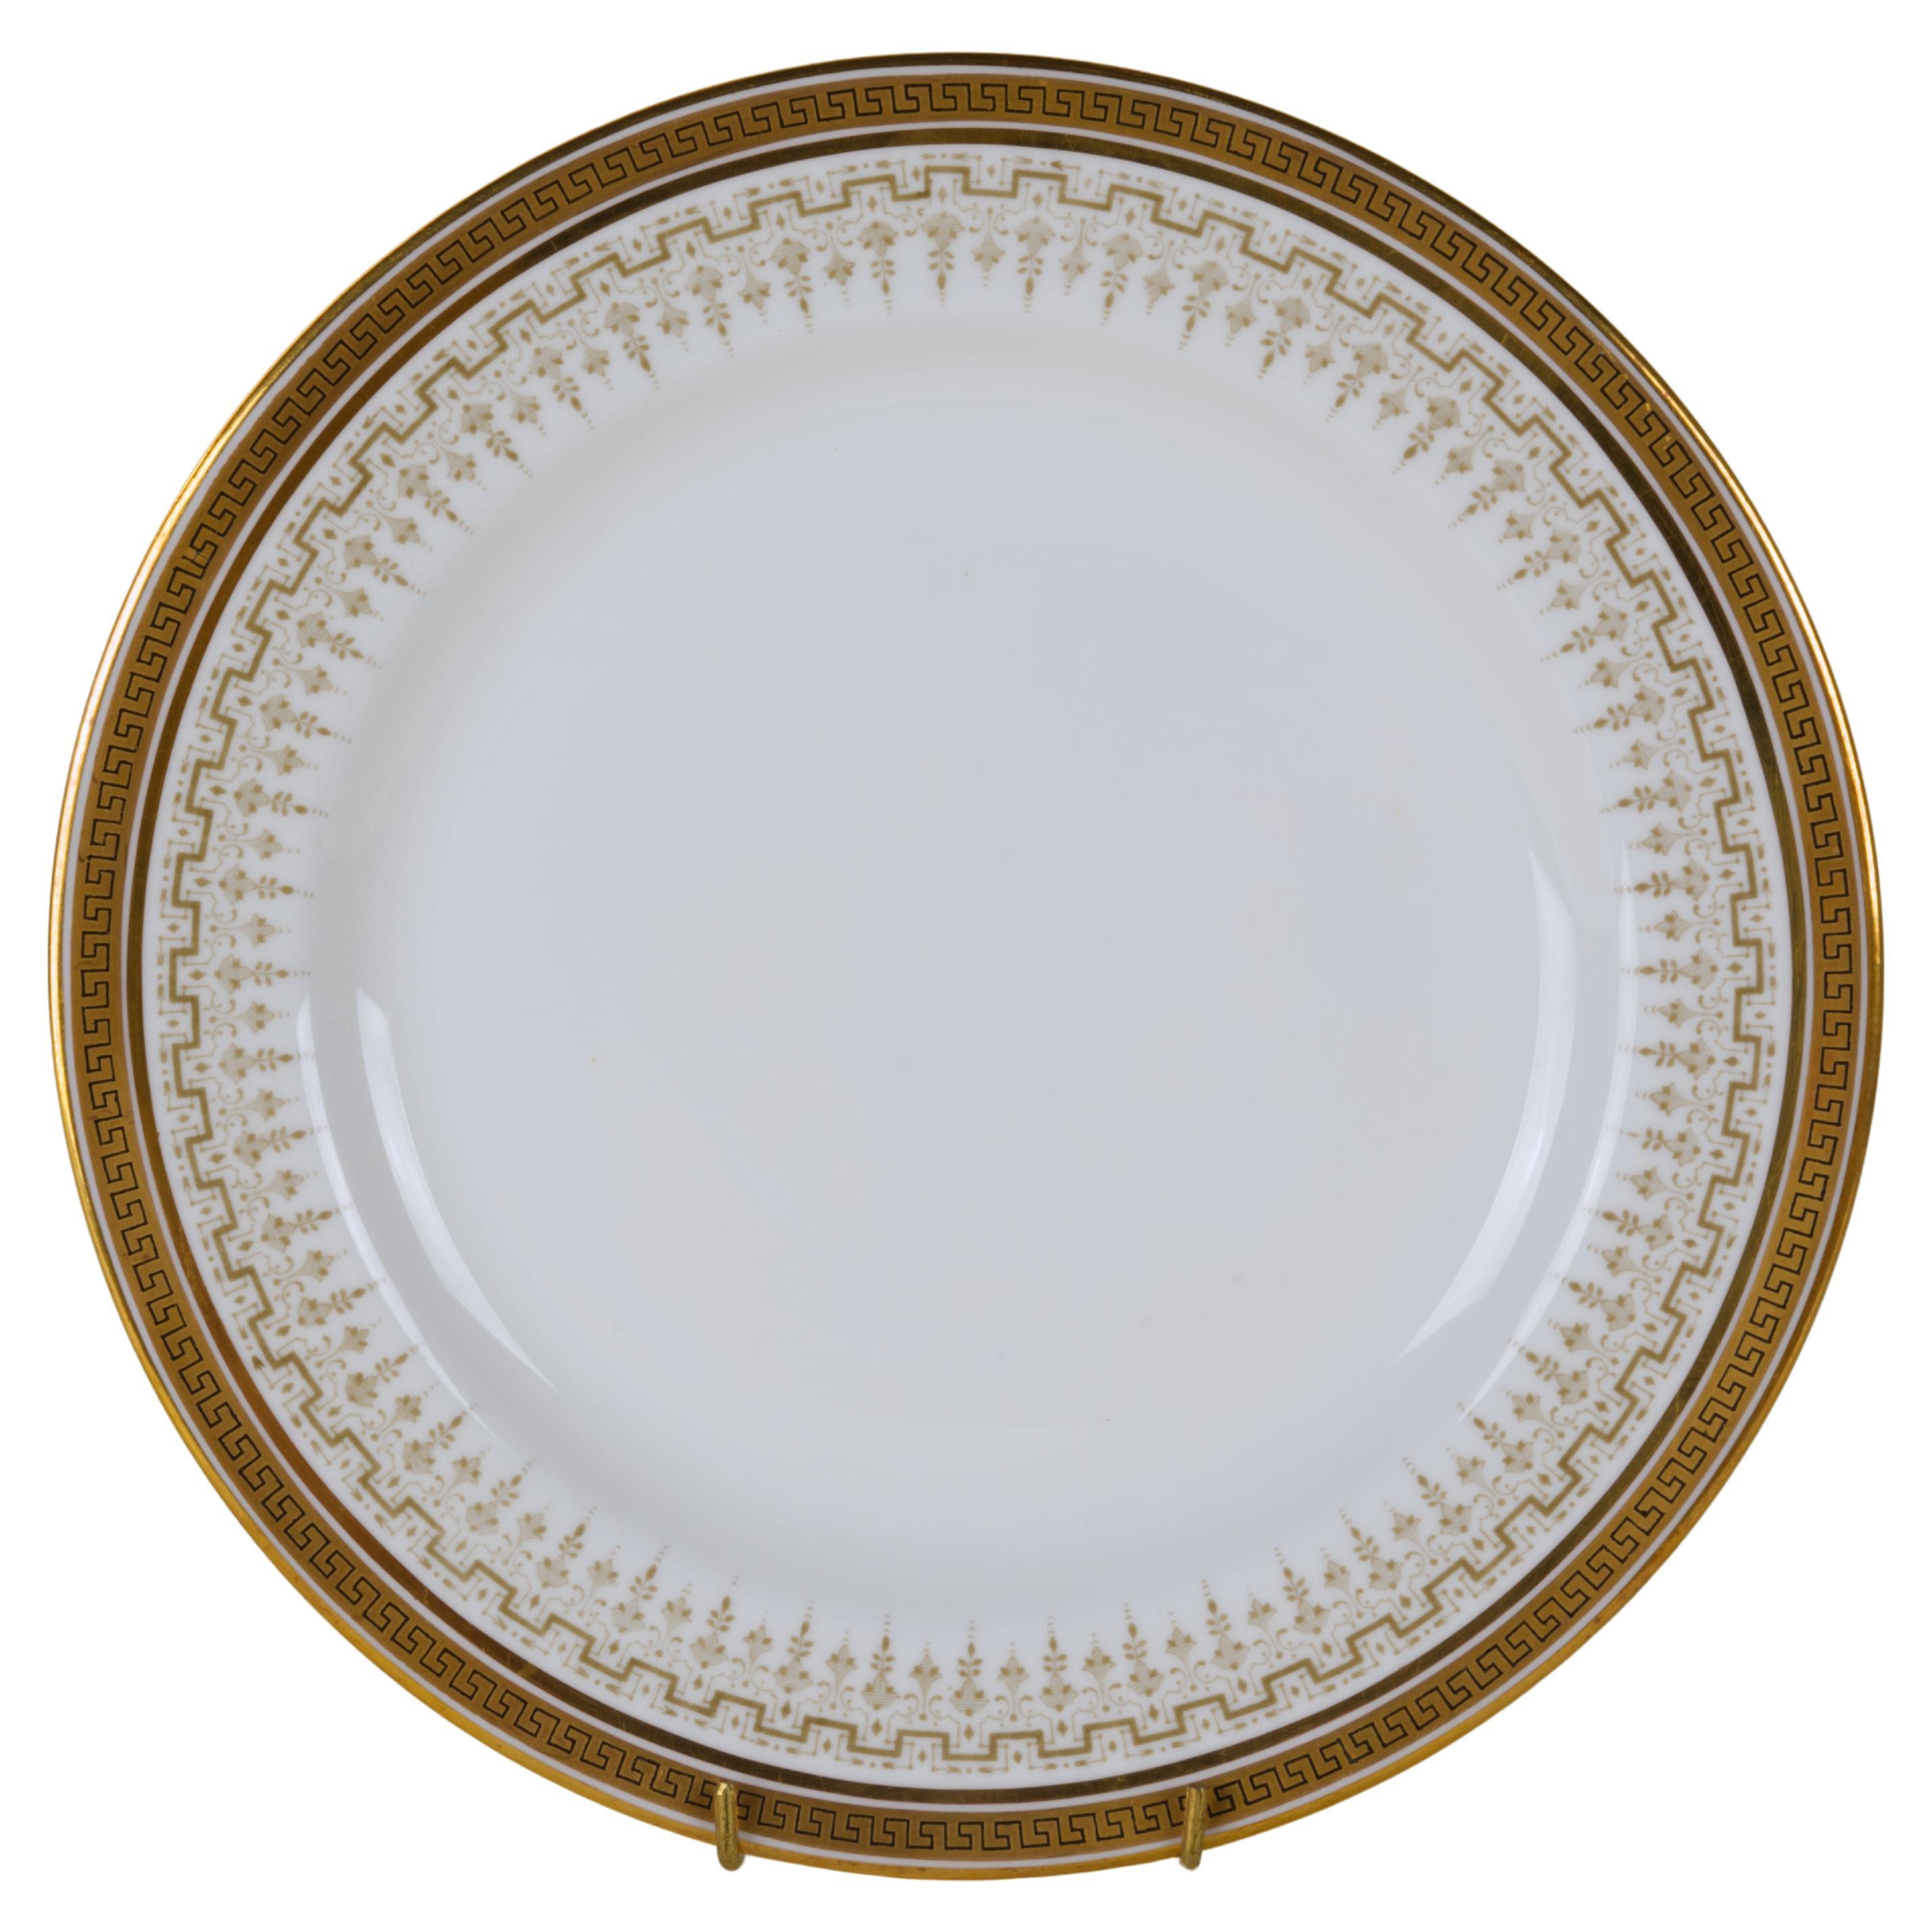 Cauldon set of 6 luncheon plates in H8413 pattern, 1904-1915 For Sale